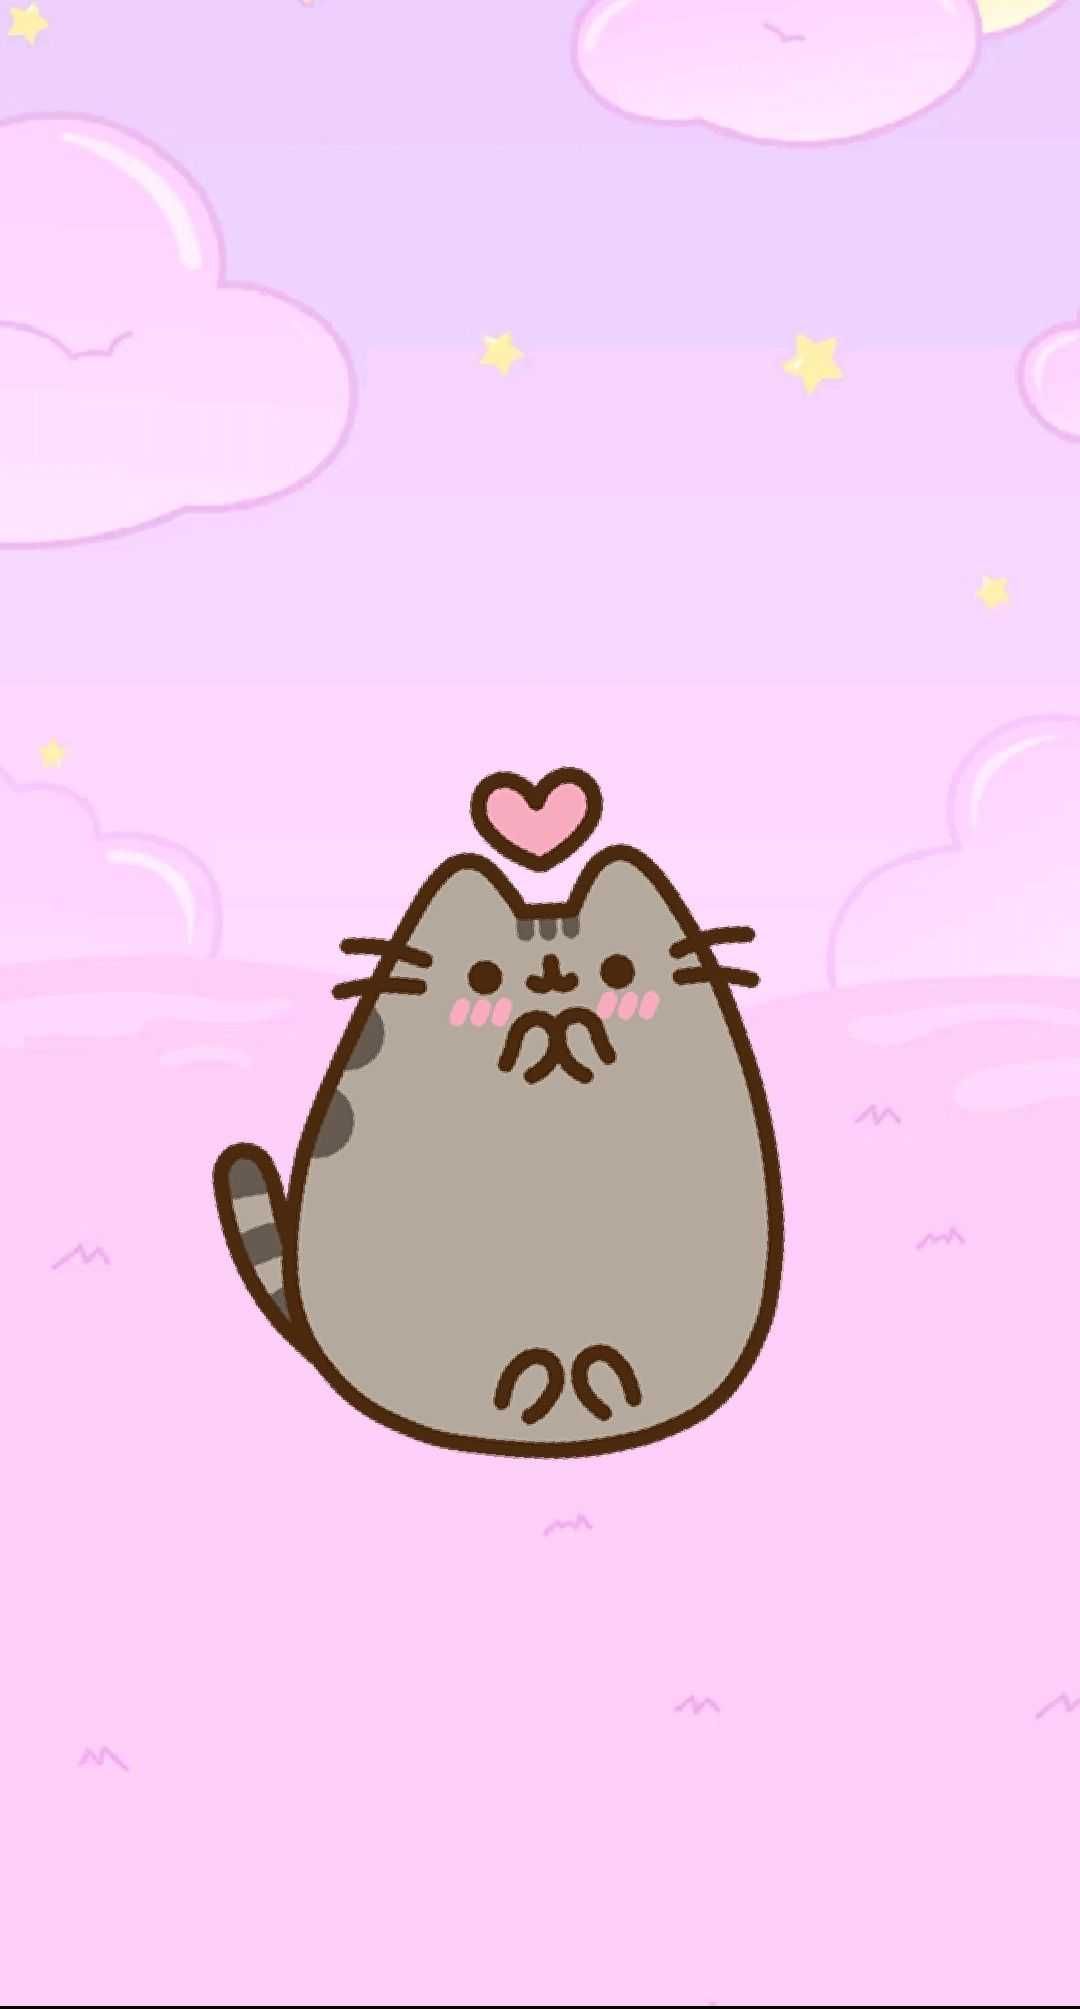 IPhone wallpaper of a cute cat with a heart above its head - Pusheen